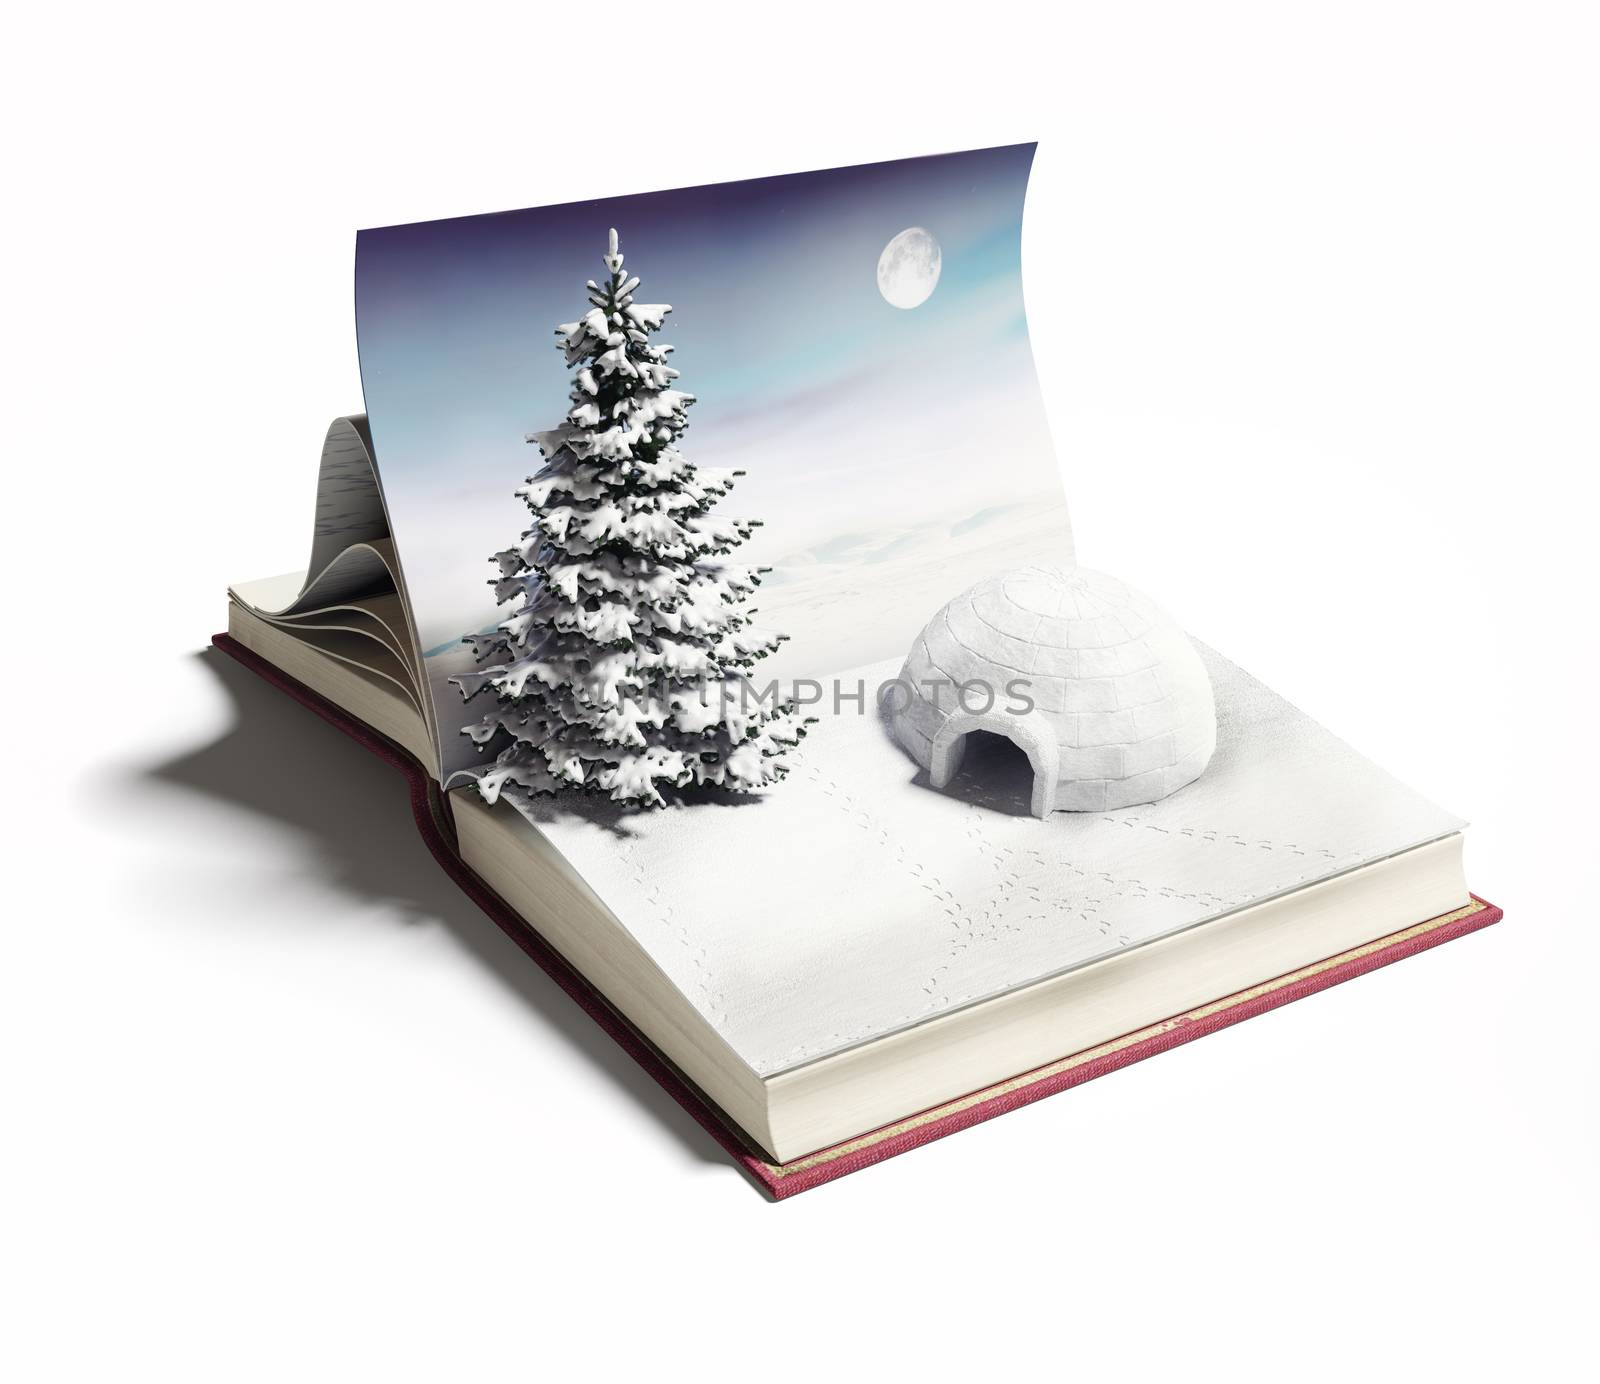 igloo on the open book by vicnt